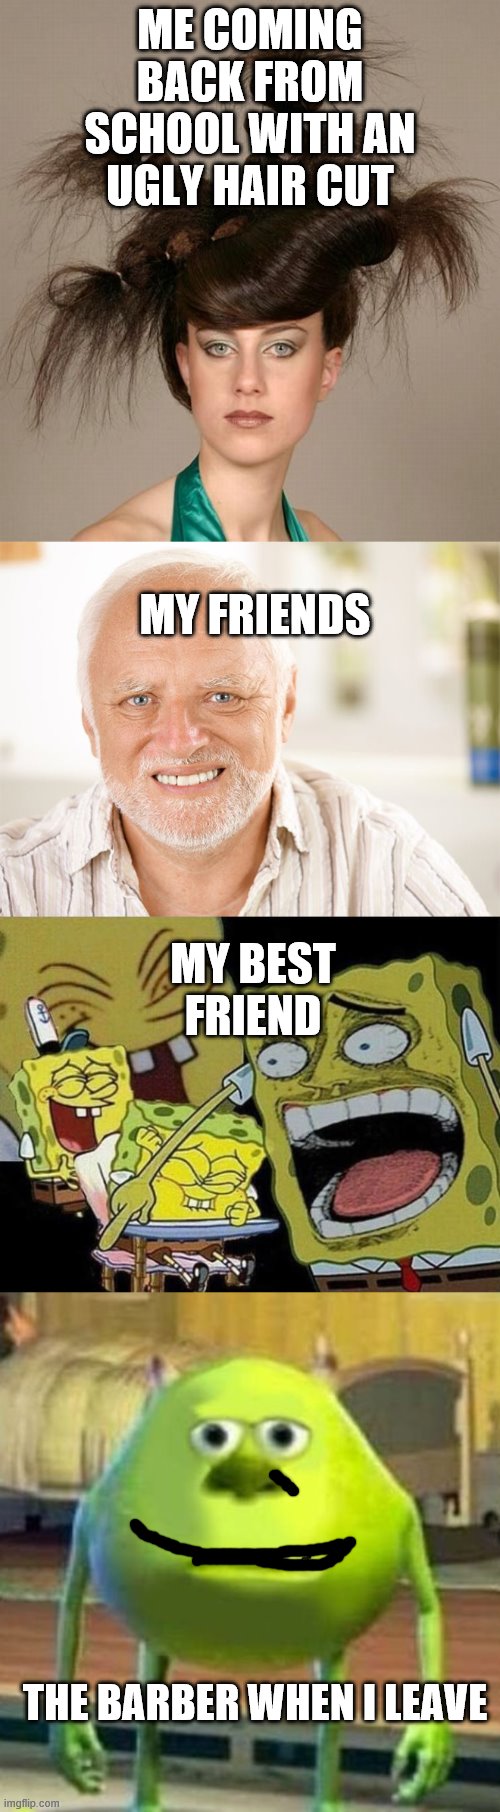 ME COMING BACK FROM SCHOOL WITH AN UGLY HAIR CUT; MY FRIENDS; MY BEST FRIEND; THE BARBER WHEN I LEAVE | image tagged in awkward smiling old man,ugly hair,spongebob laughing hysterically,monsters inc face swap | made w/ Imgflip meme maker